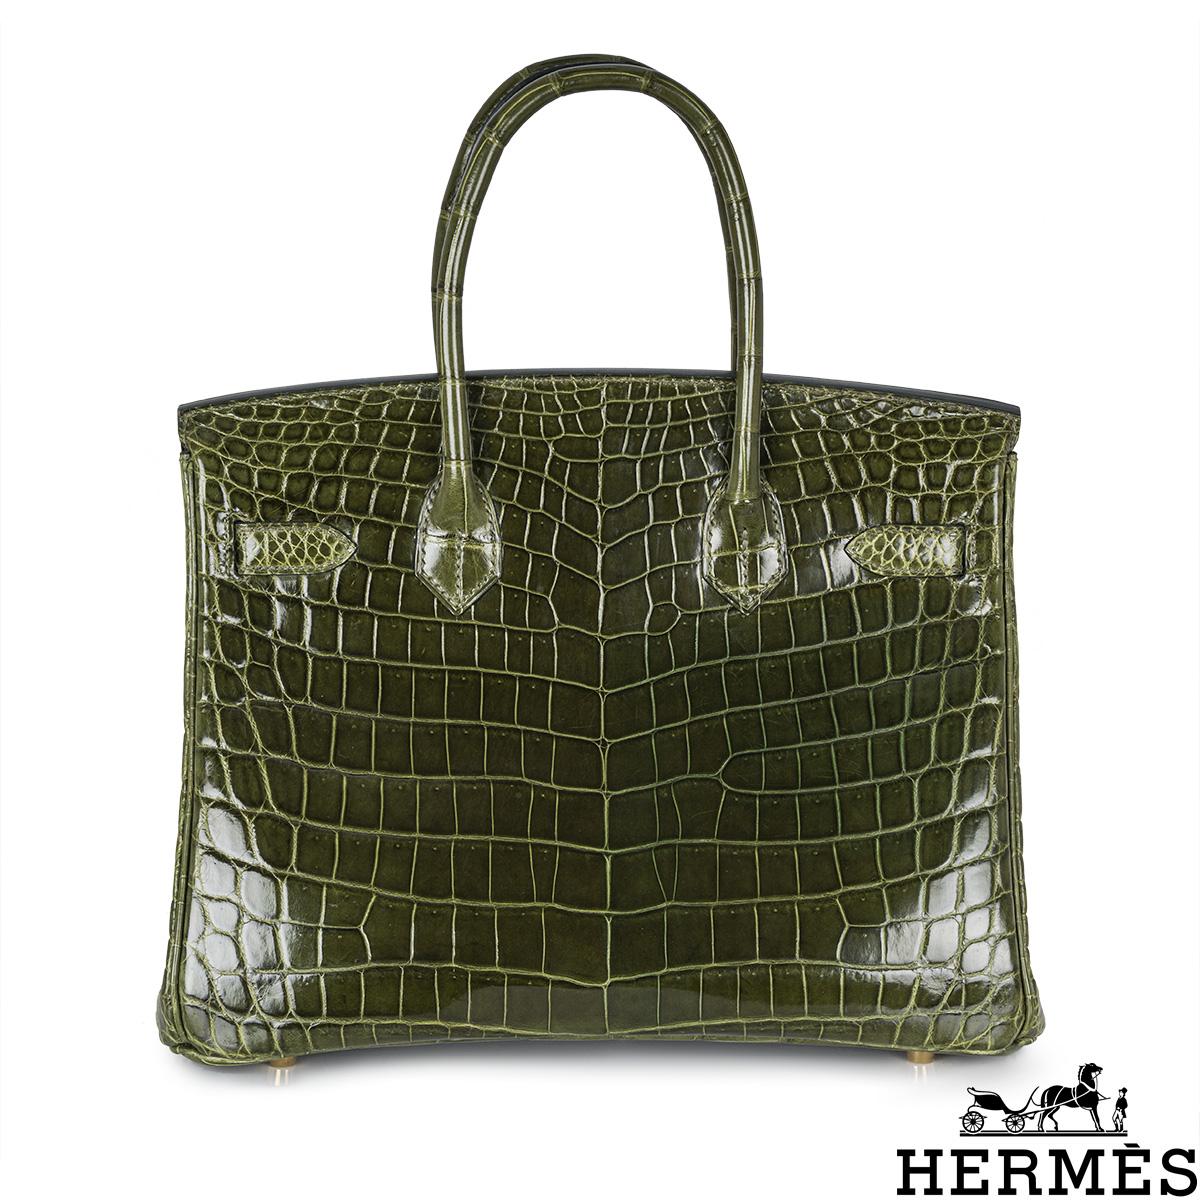 A beautiful Hermès 30cm Birkin bag. The exterior of this exotic Birkin is in a shiny Vert Veronese Crocodile with tonal stitching. It adorns gold-tone hardware, two top handles and front toggle closure. The interior features a zipper pocket with an